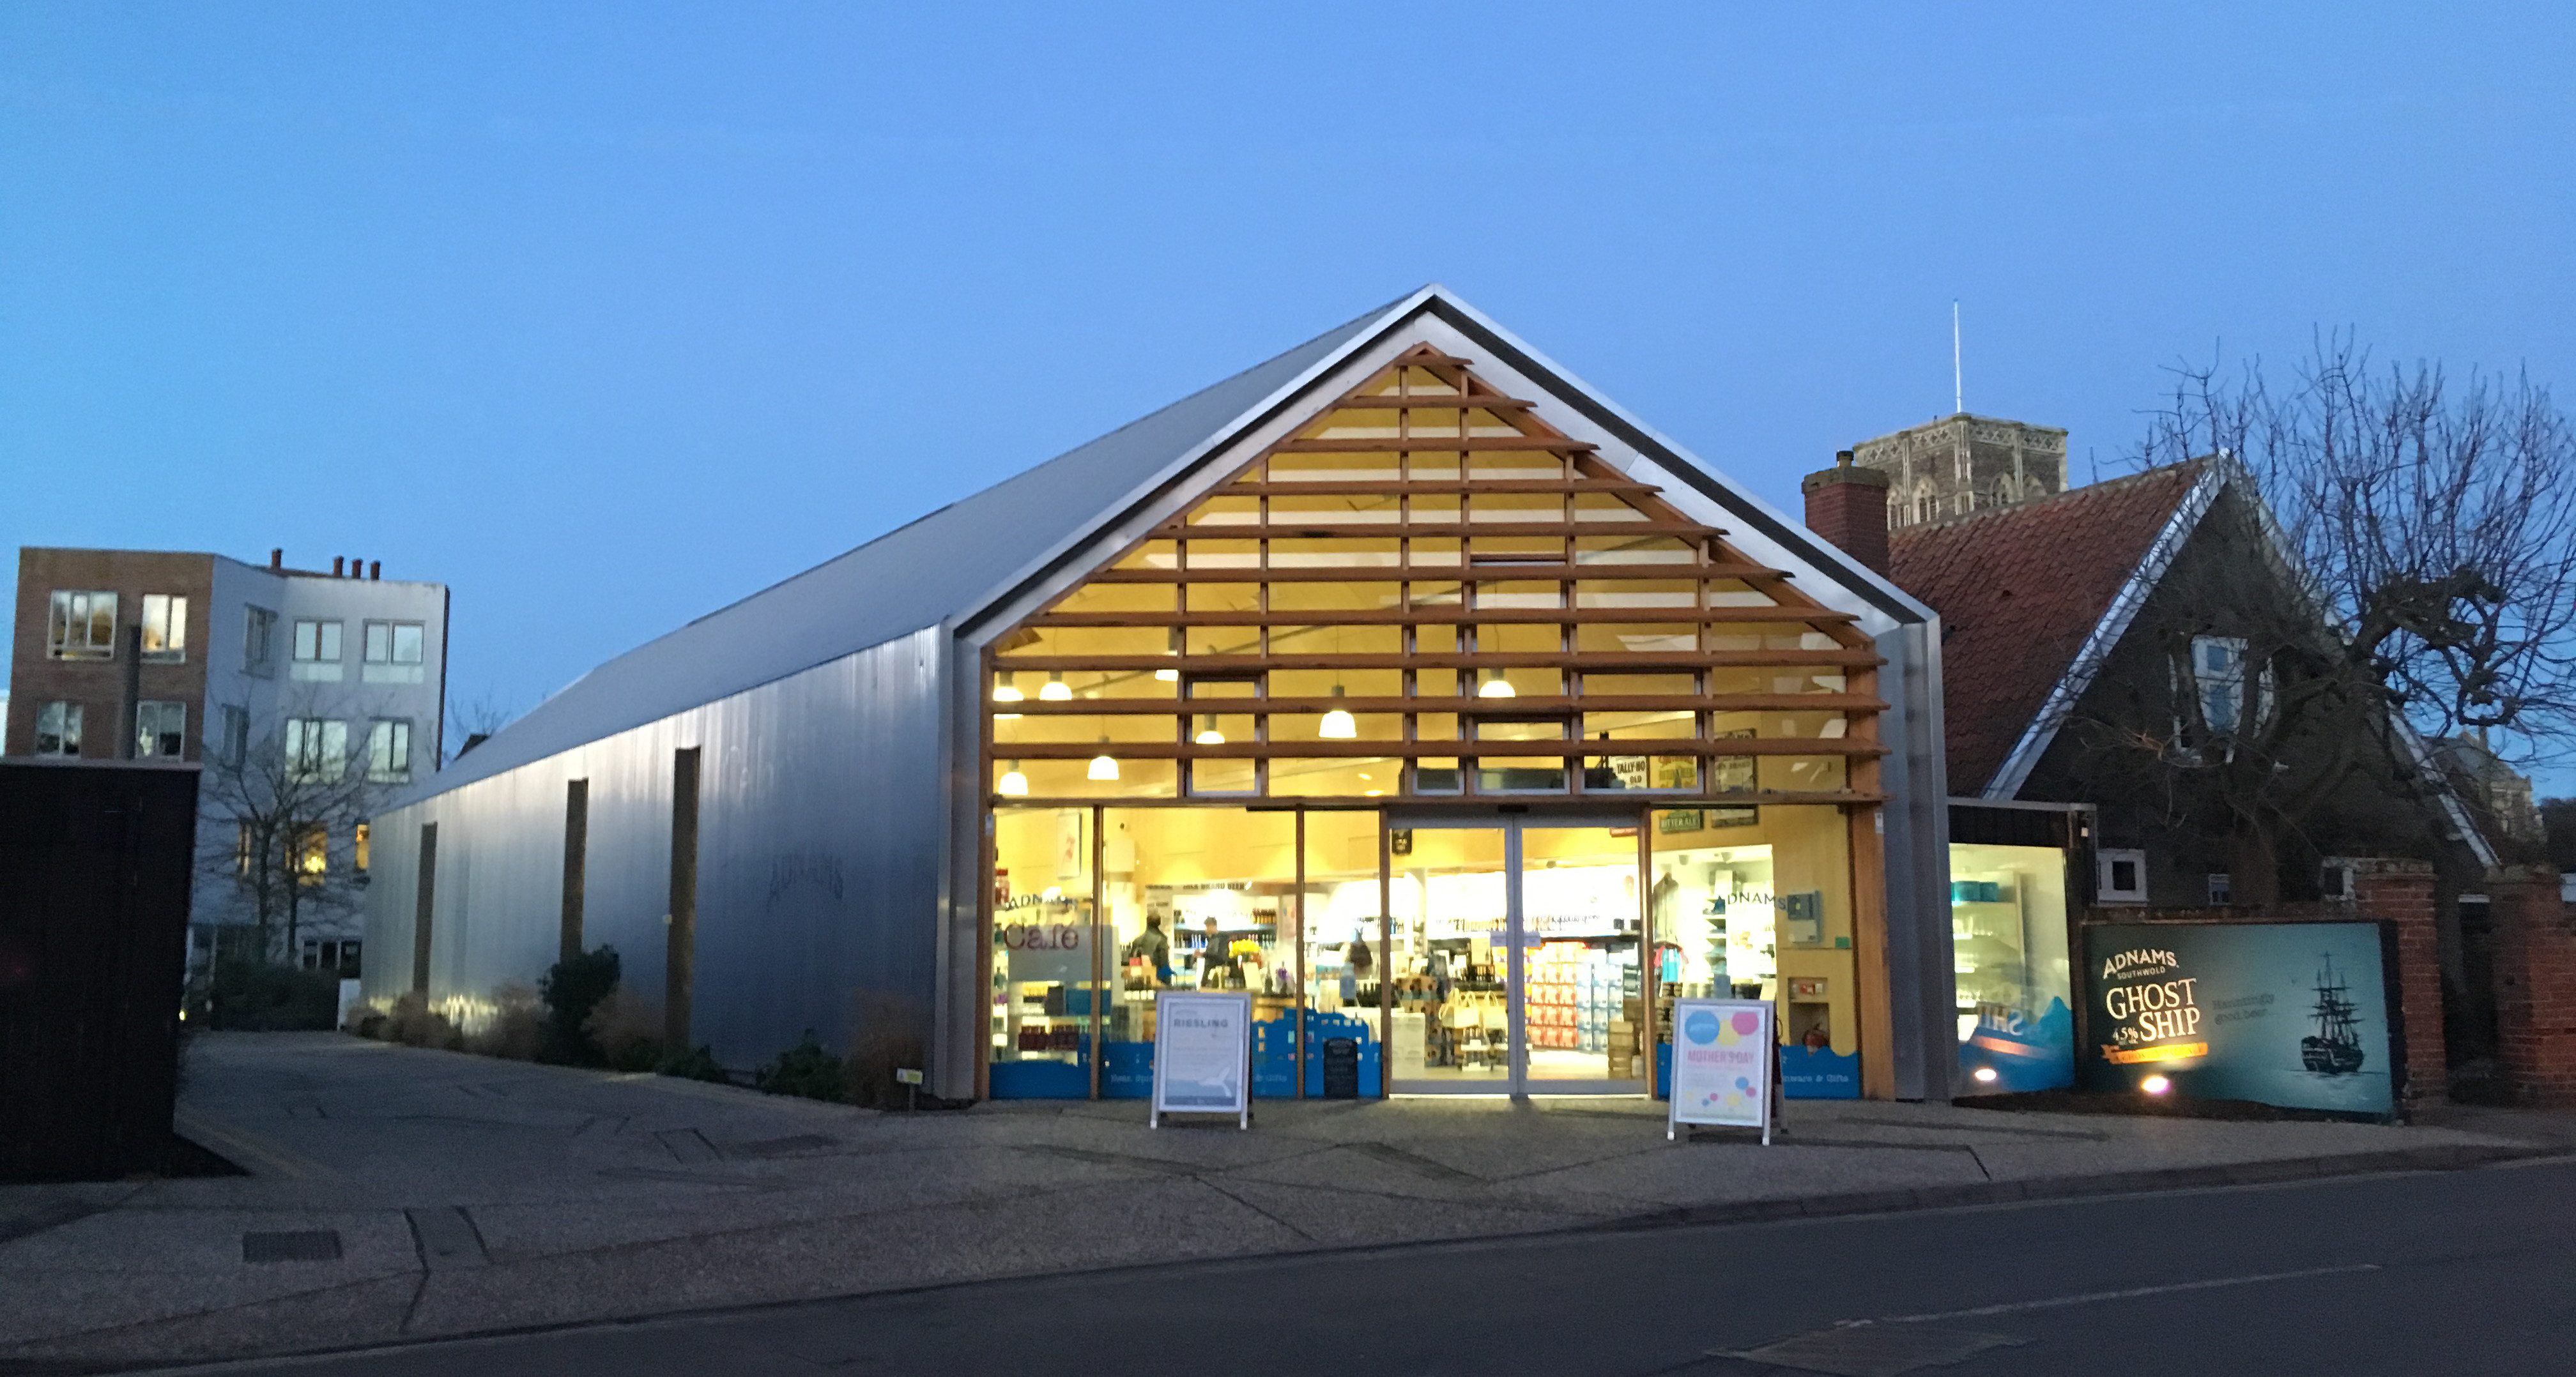 Adnams store in Southwold: built from sustainably sourced timber and insulated with sheep's wool